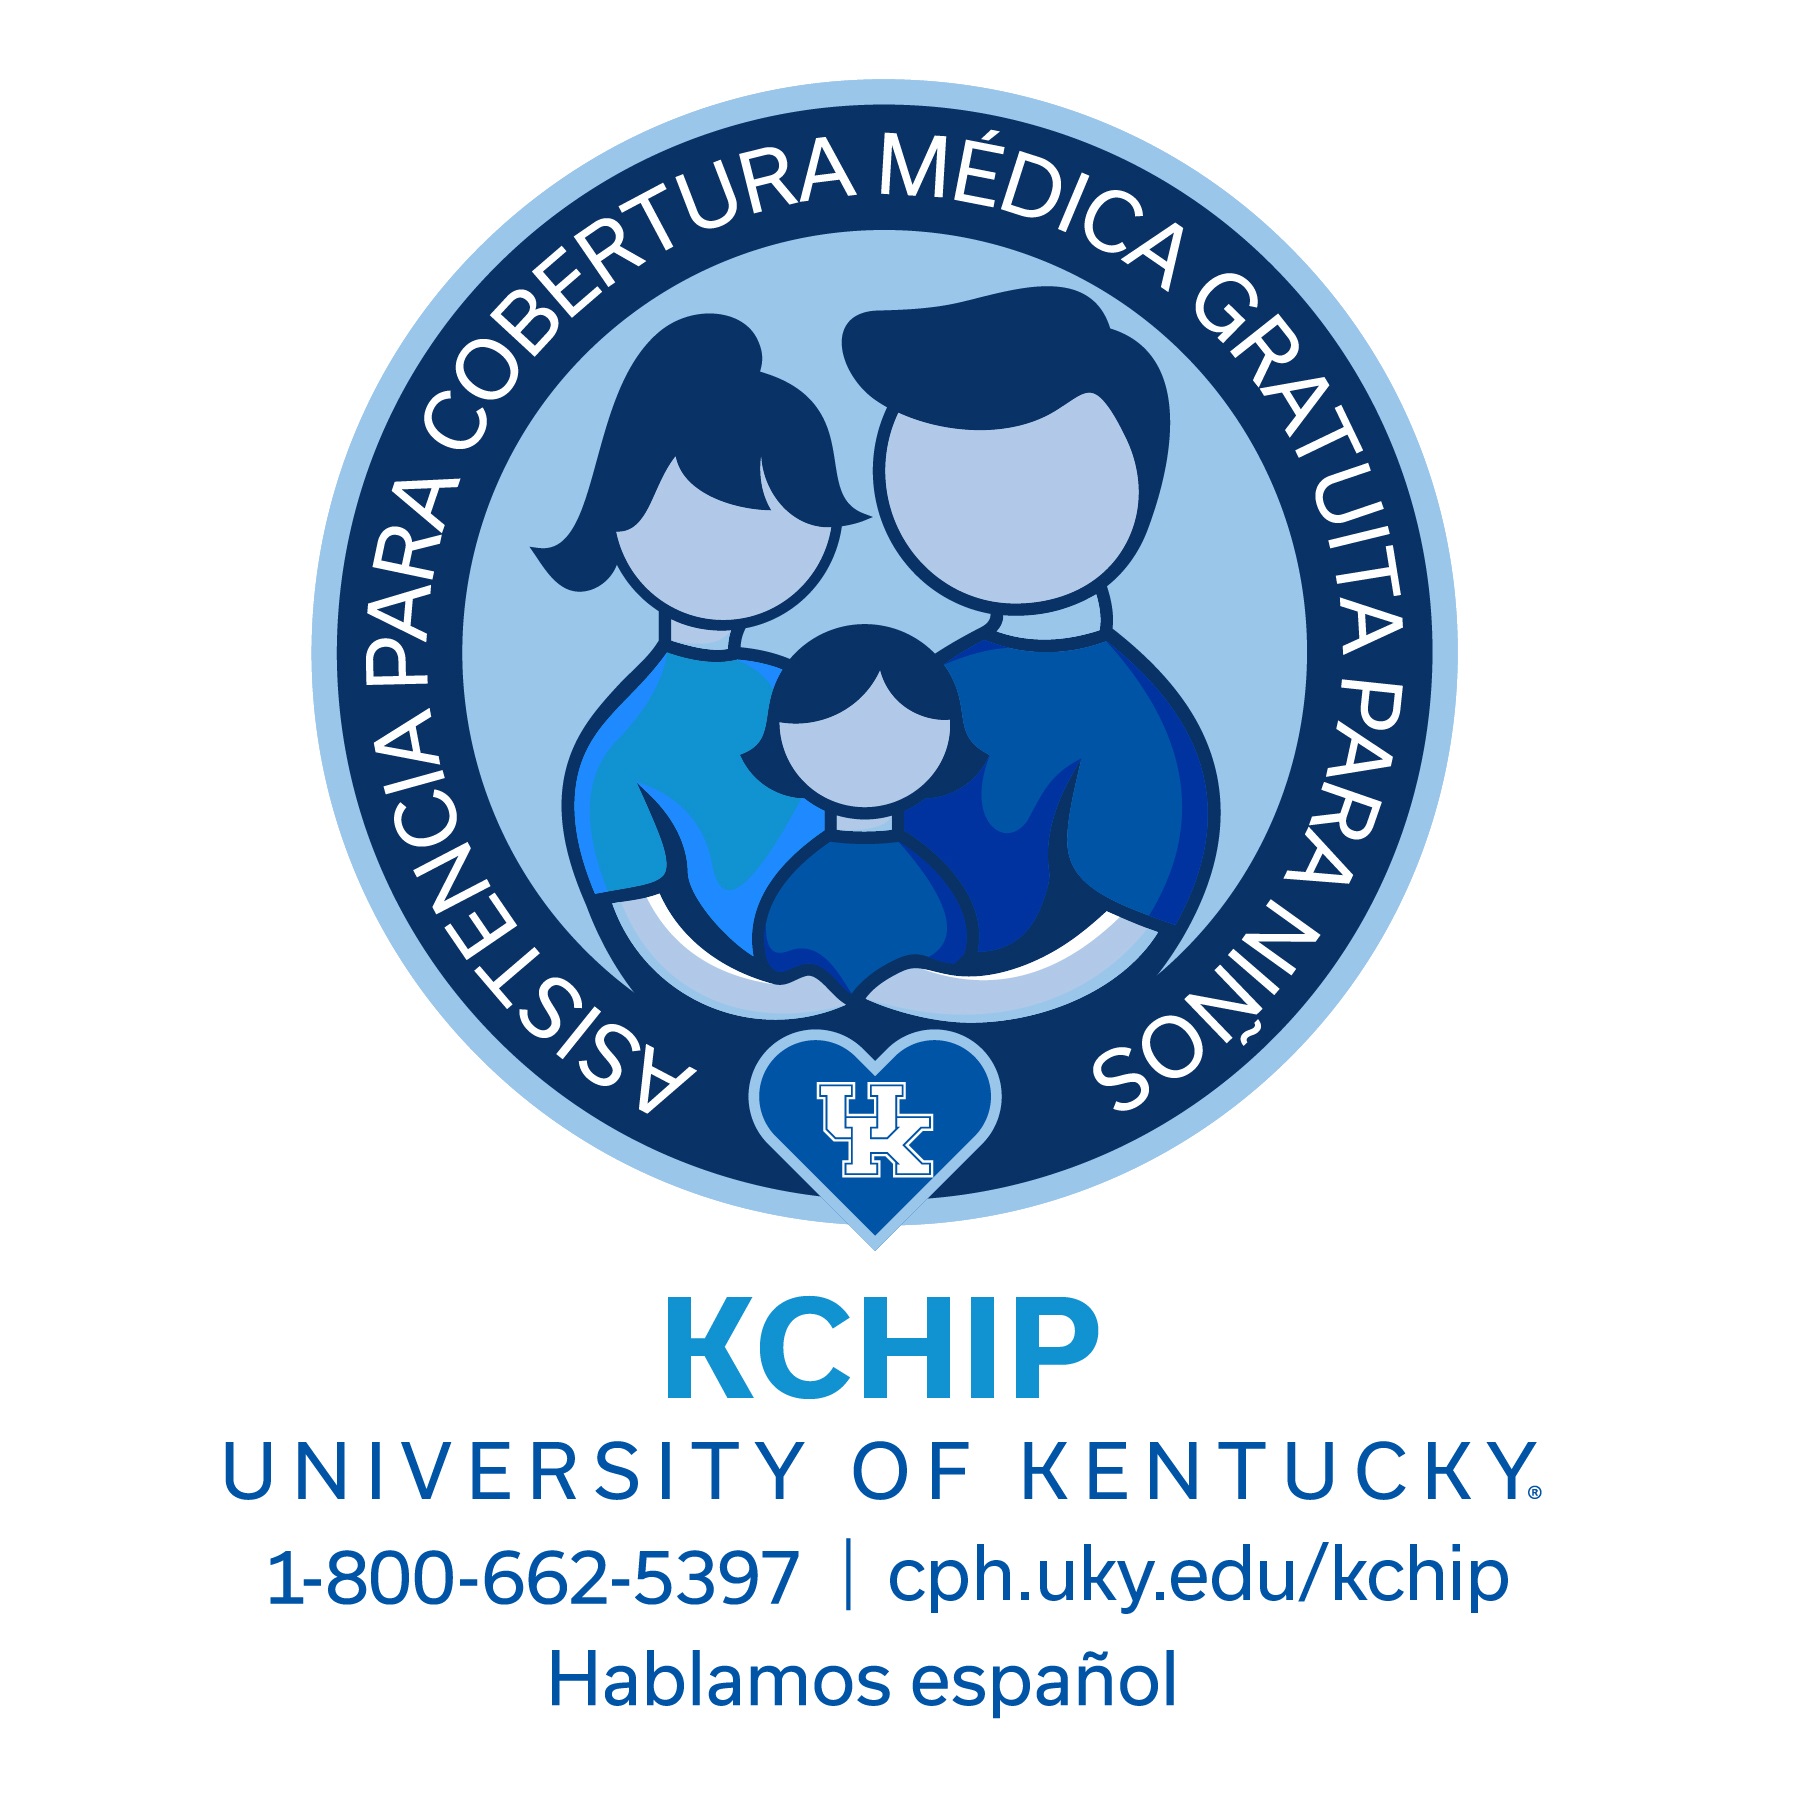 a special logo about how KCHIP helps families